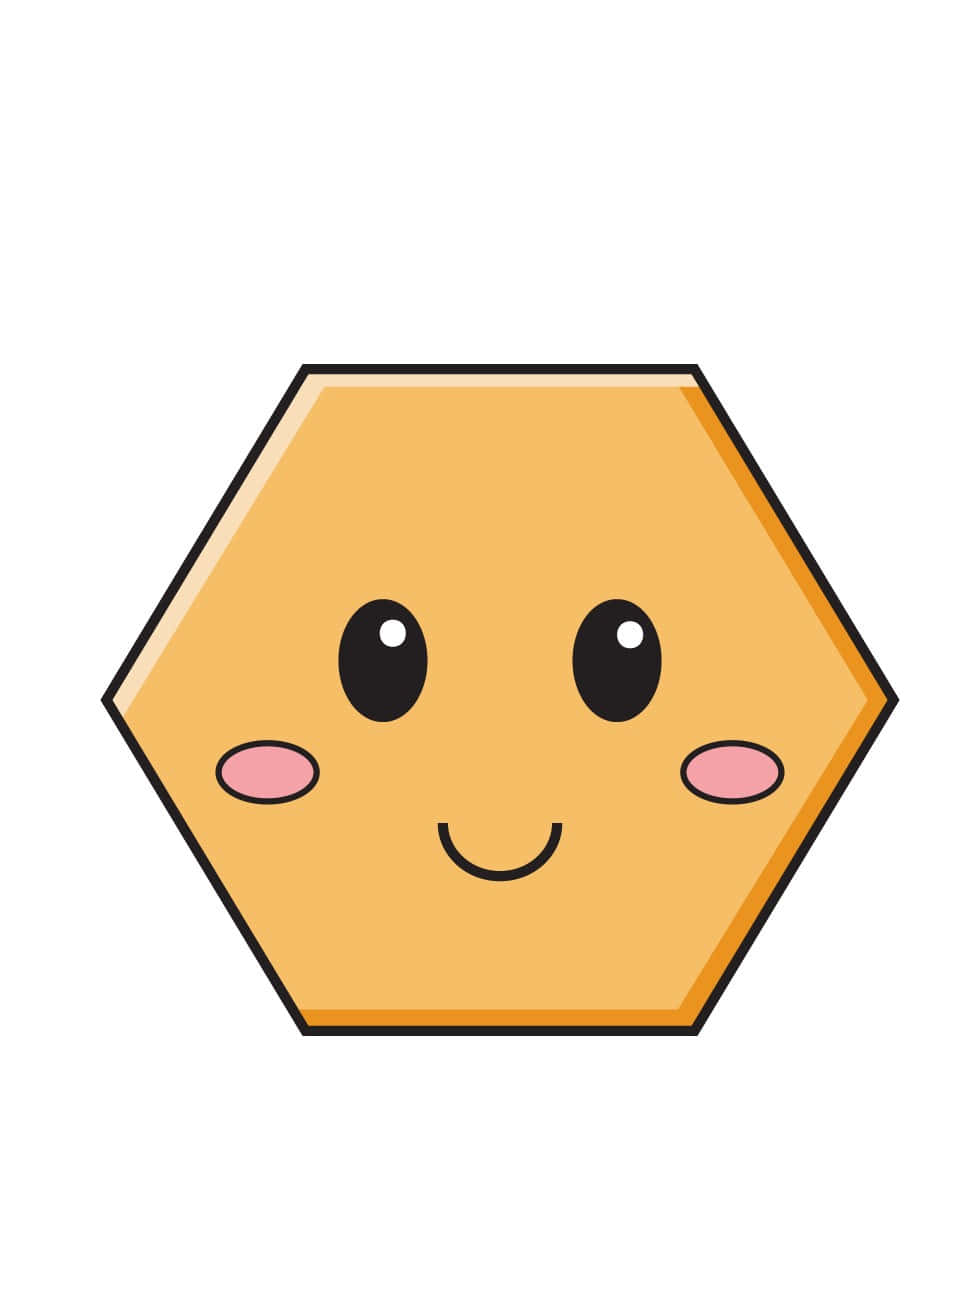 Hexagon With Smiley Face Picture